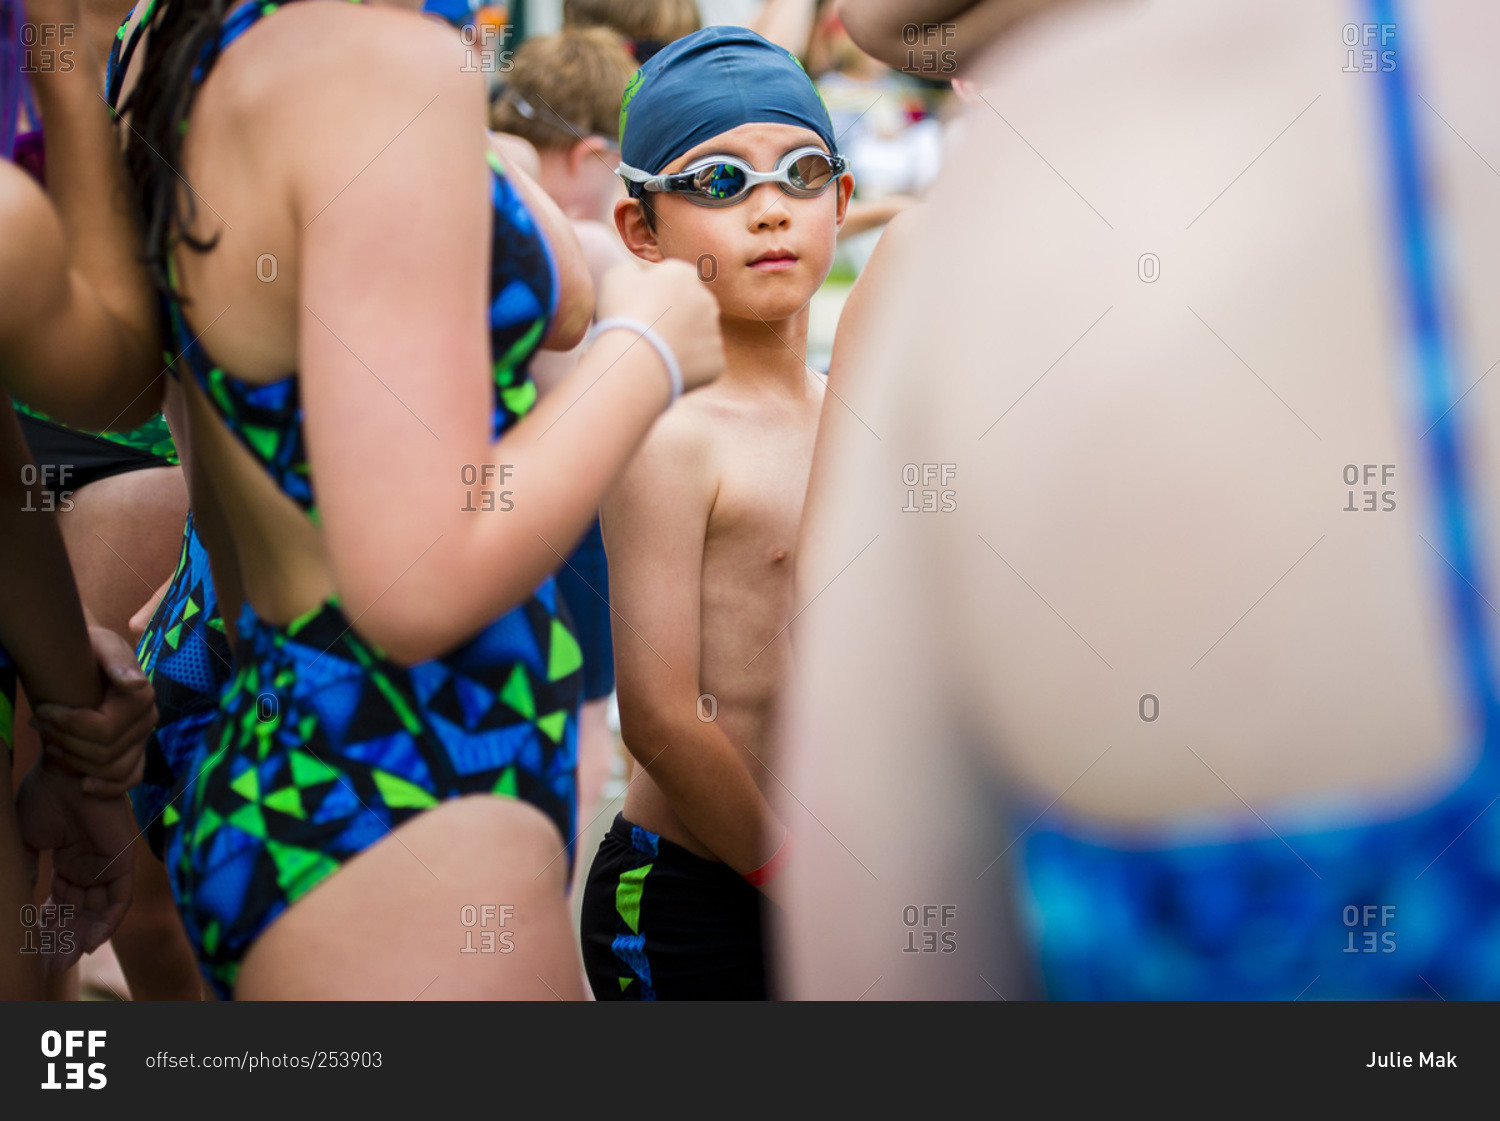 A boy in swimming goggles stands in a crowd of swimmers